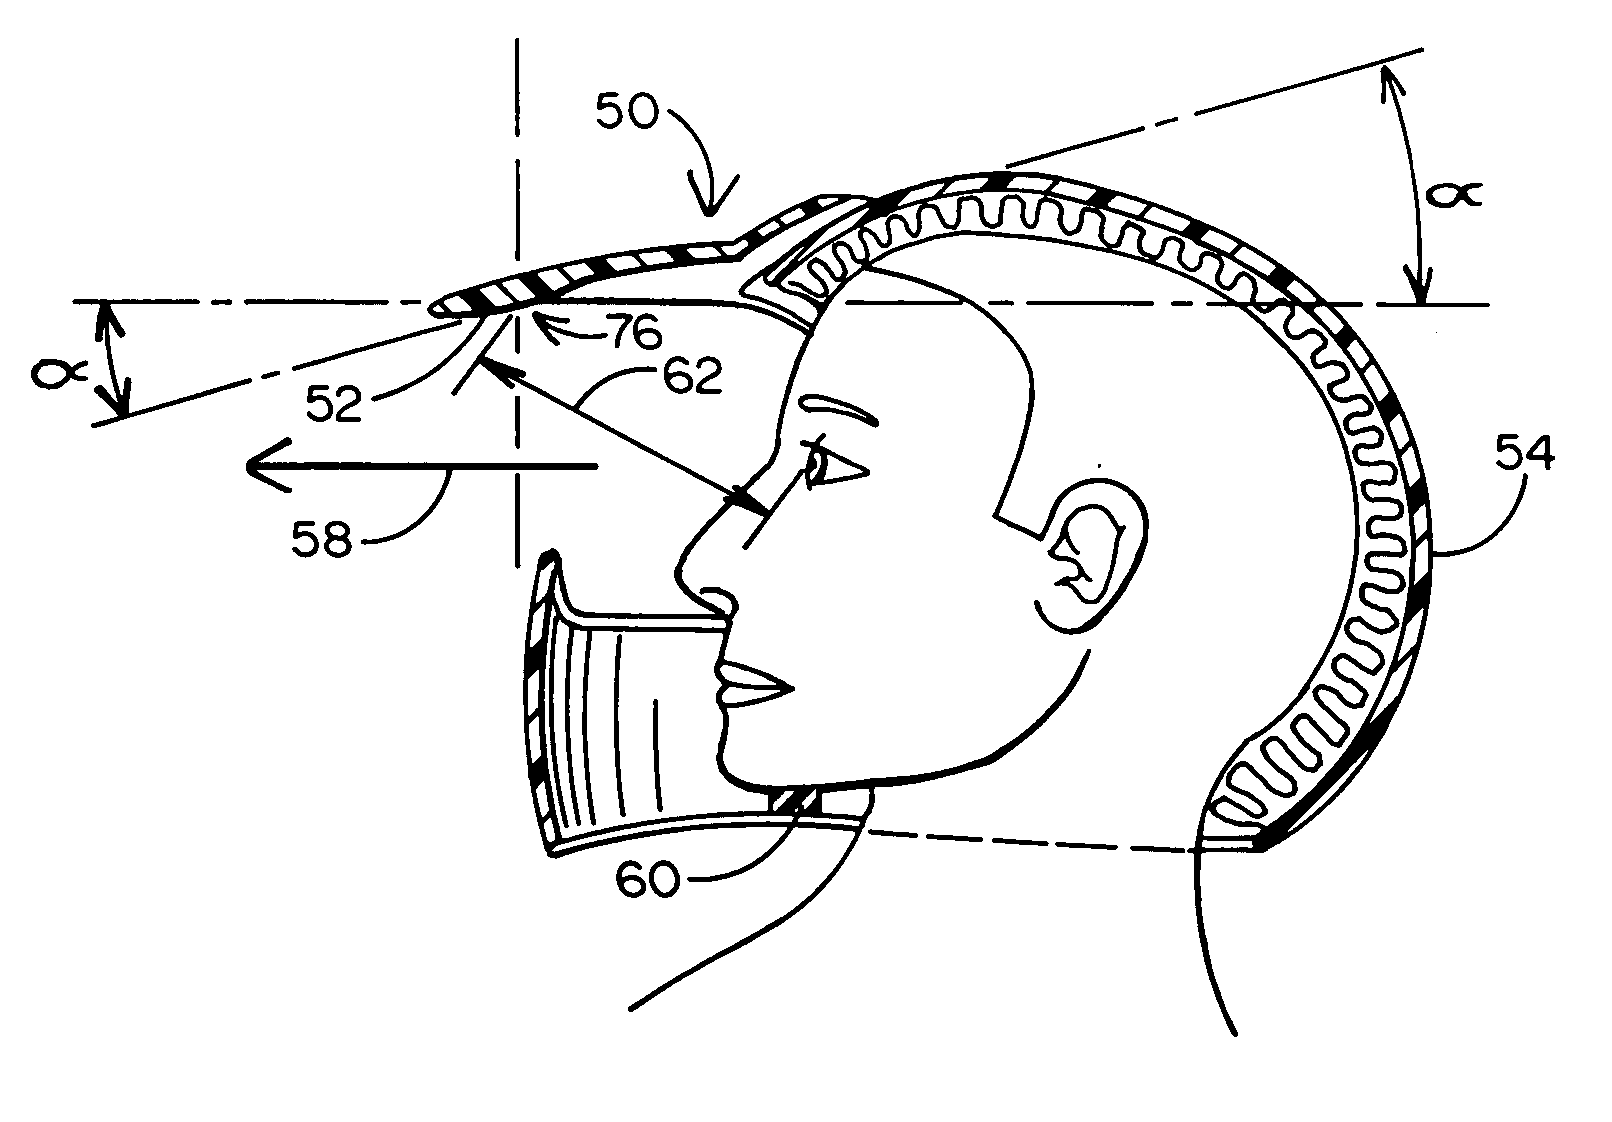 Visors and rearview mirrors for helmets